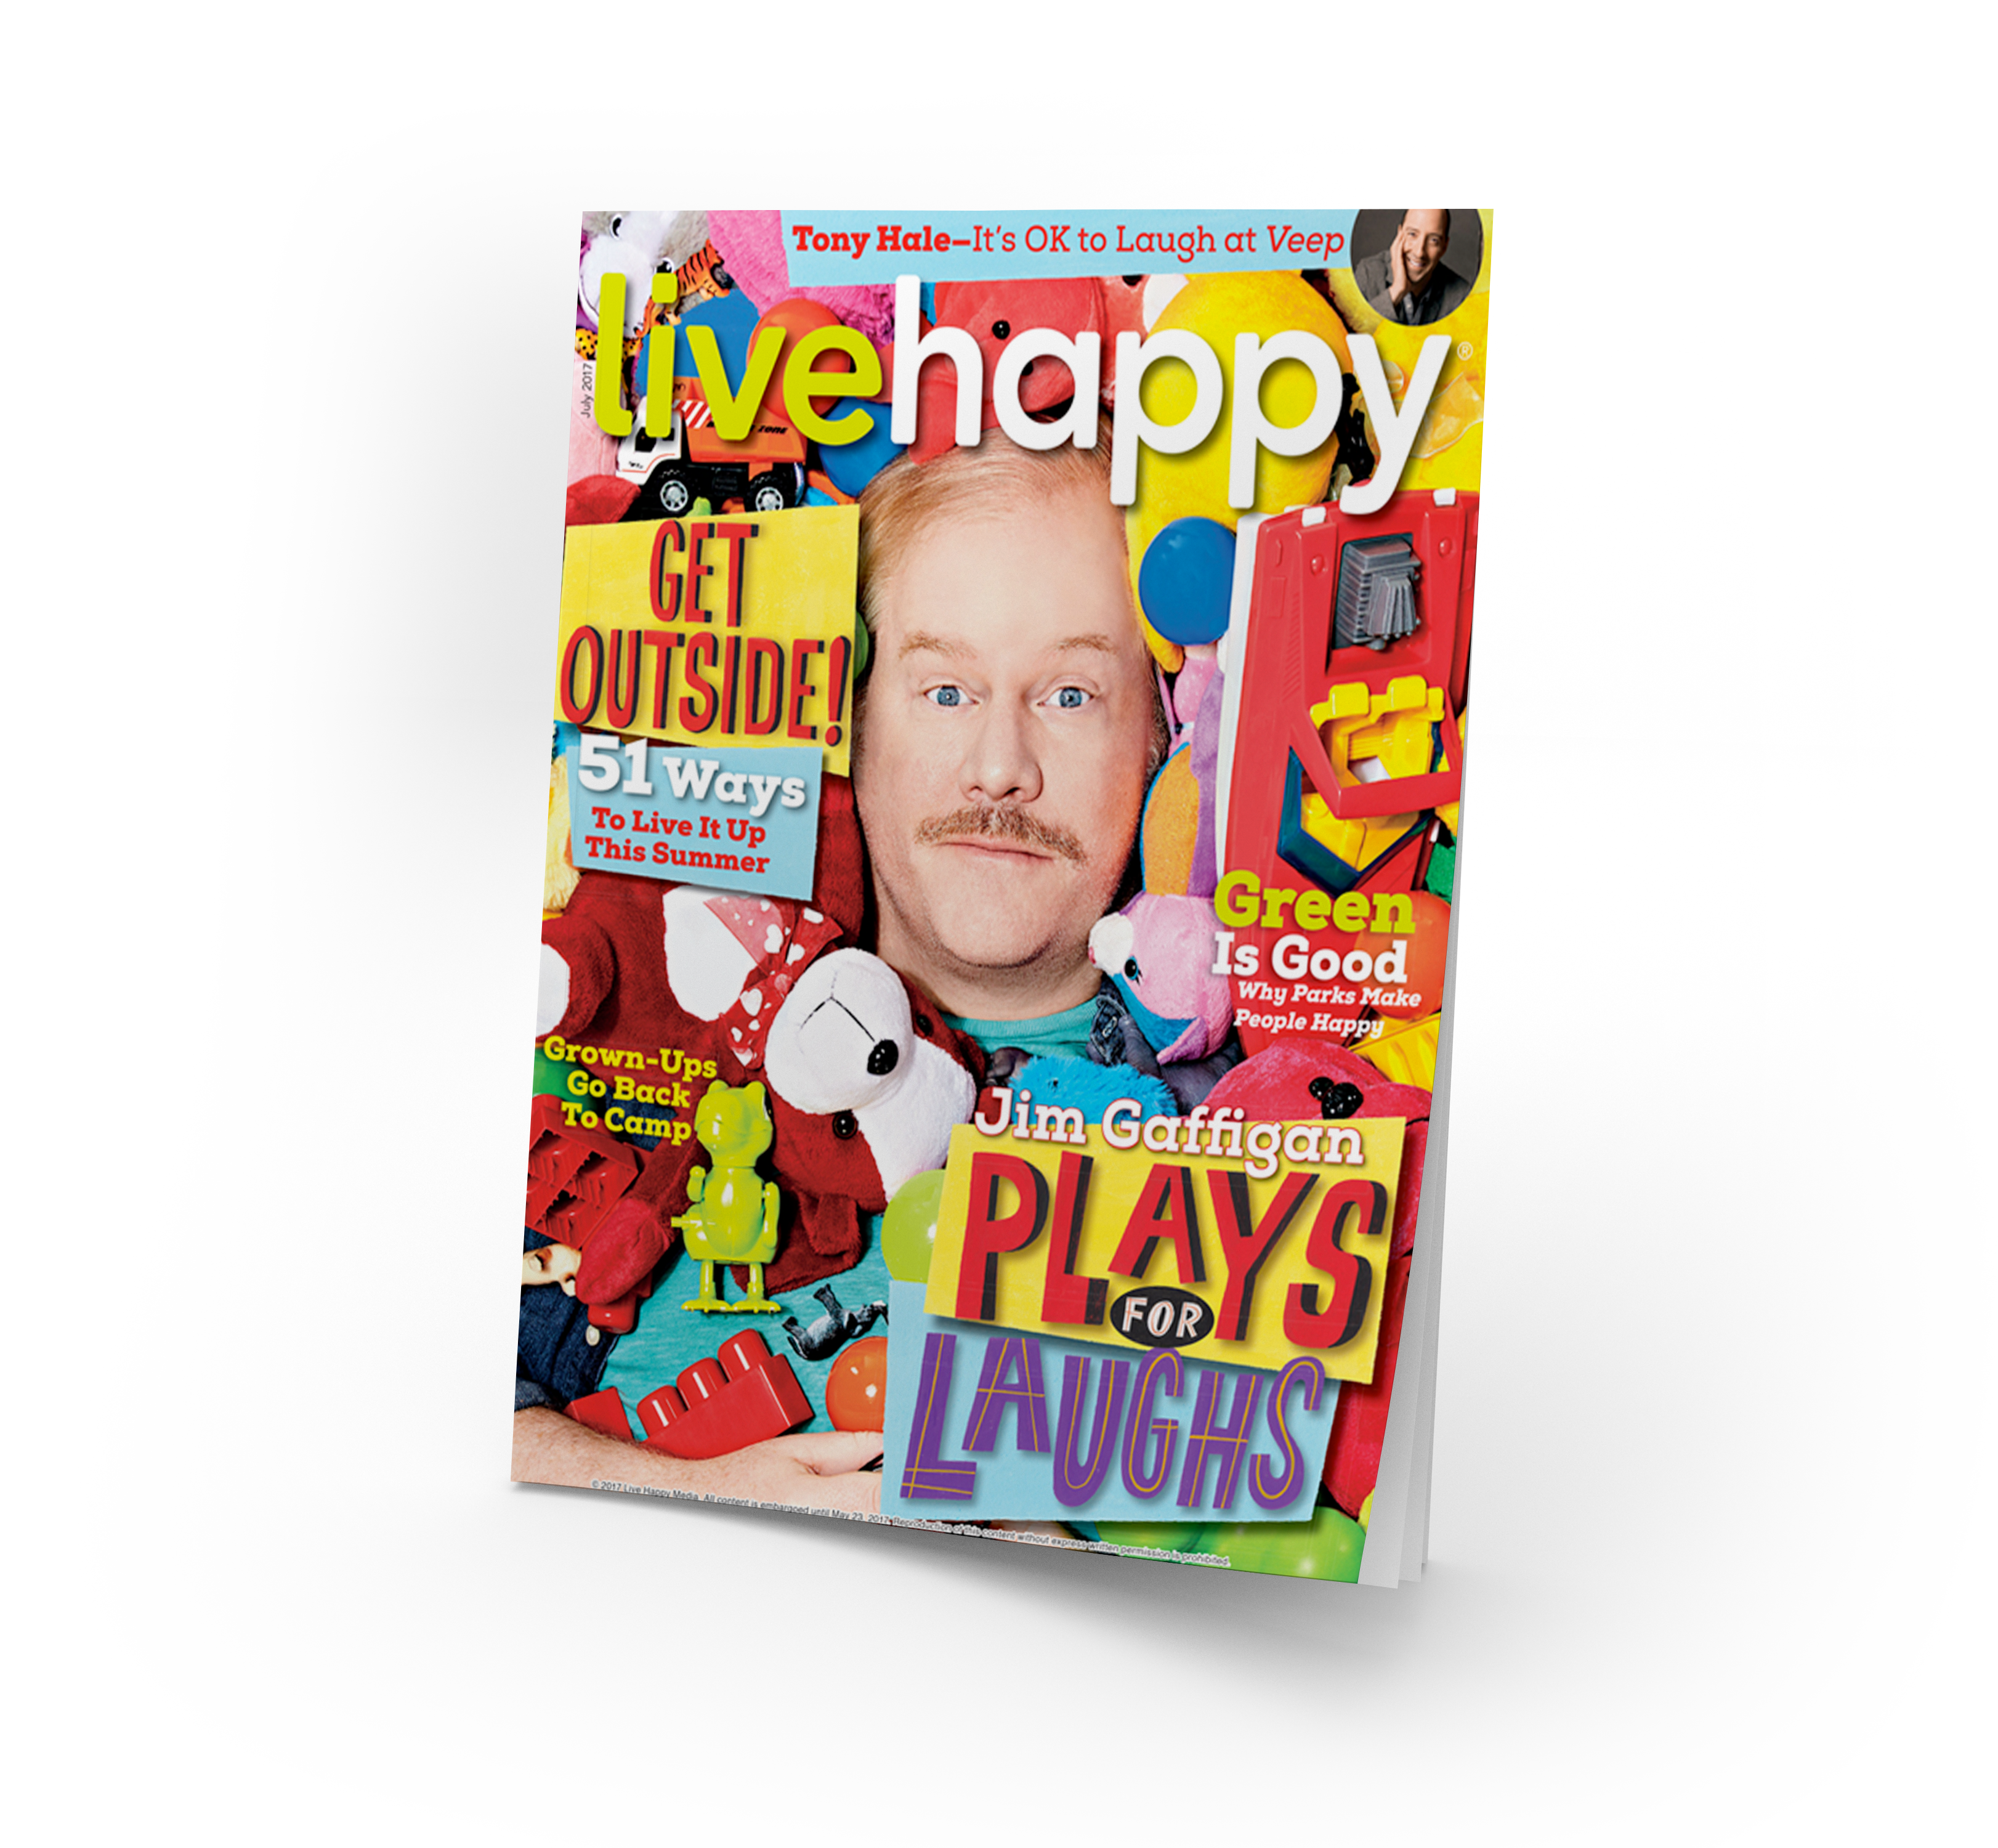 live happy magazine with man suffocating in stuffed animals